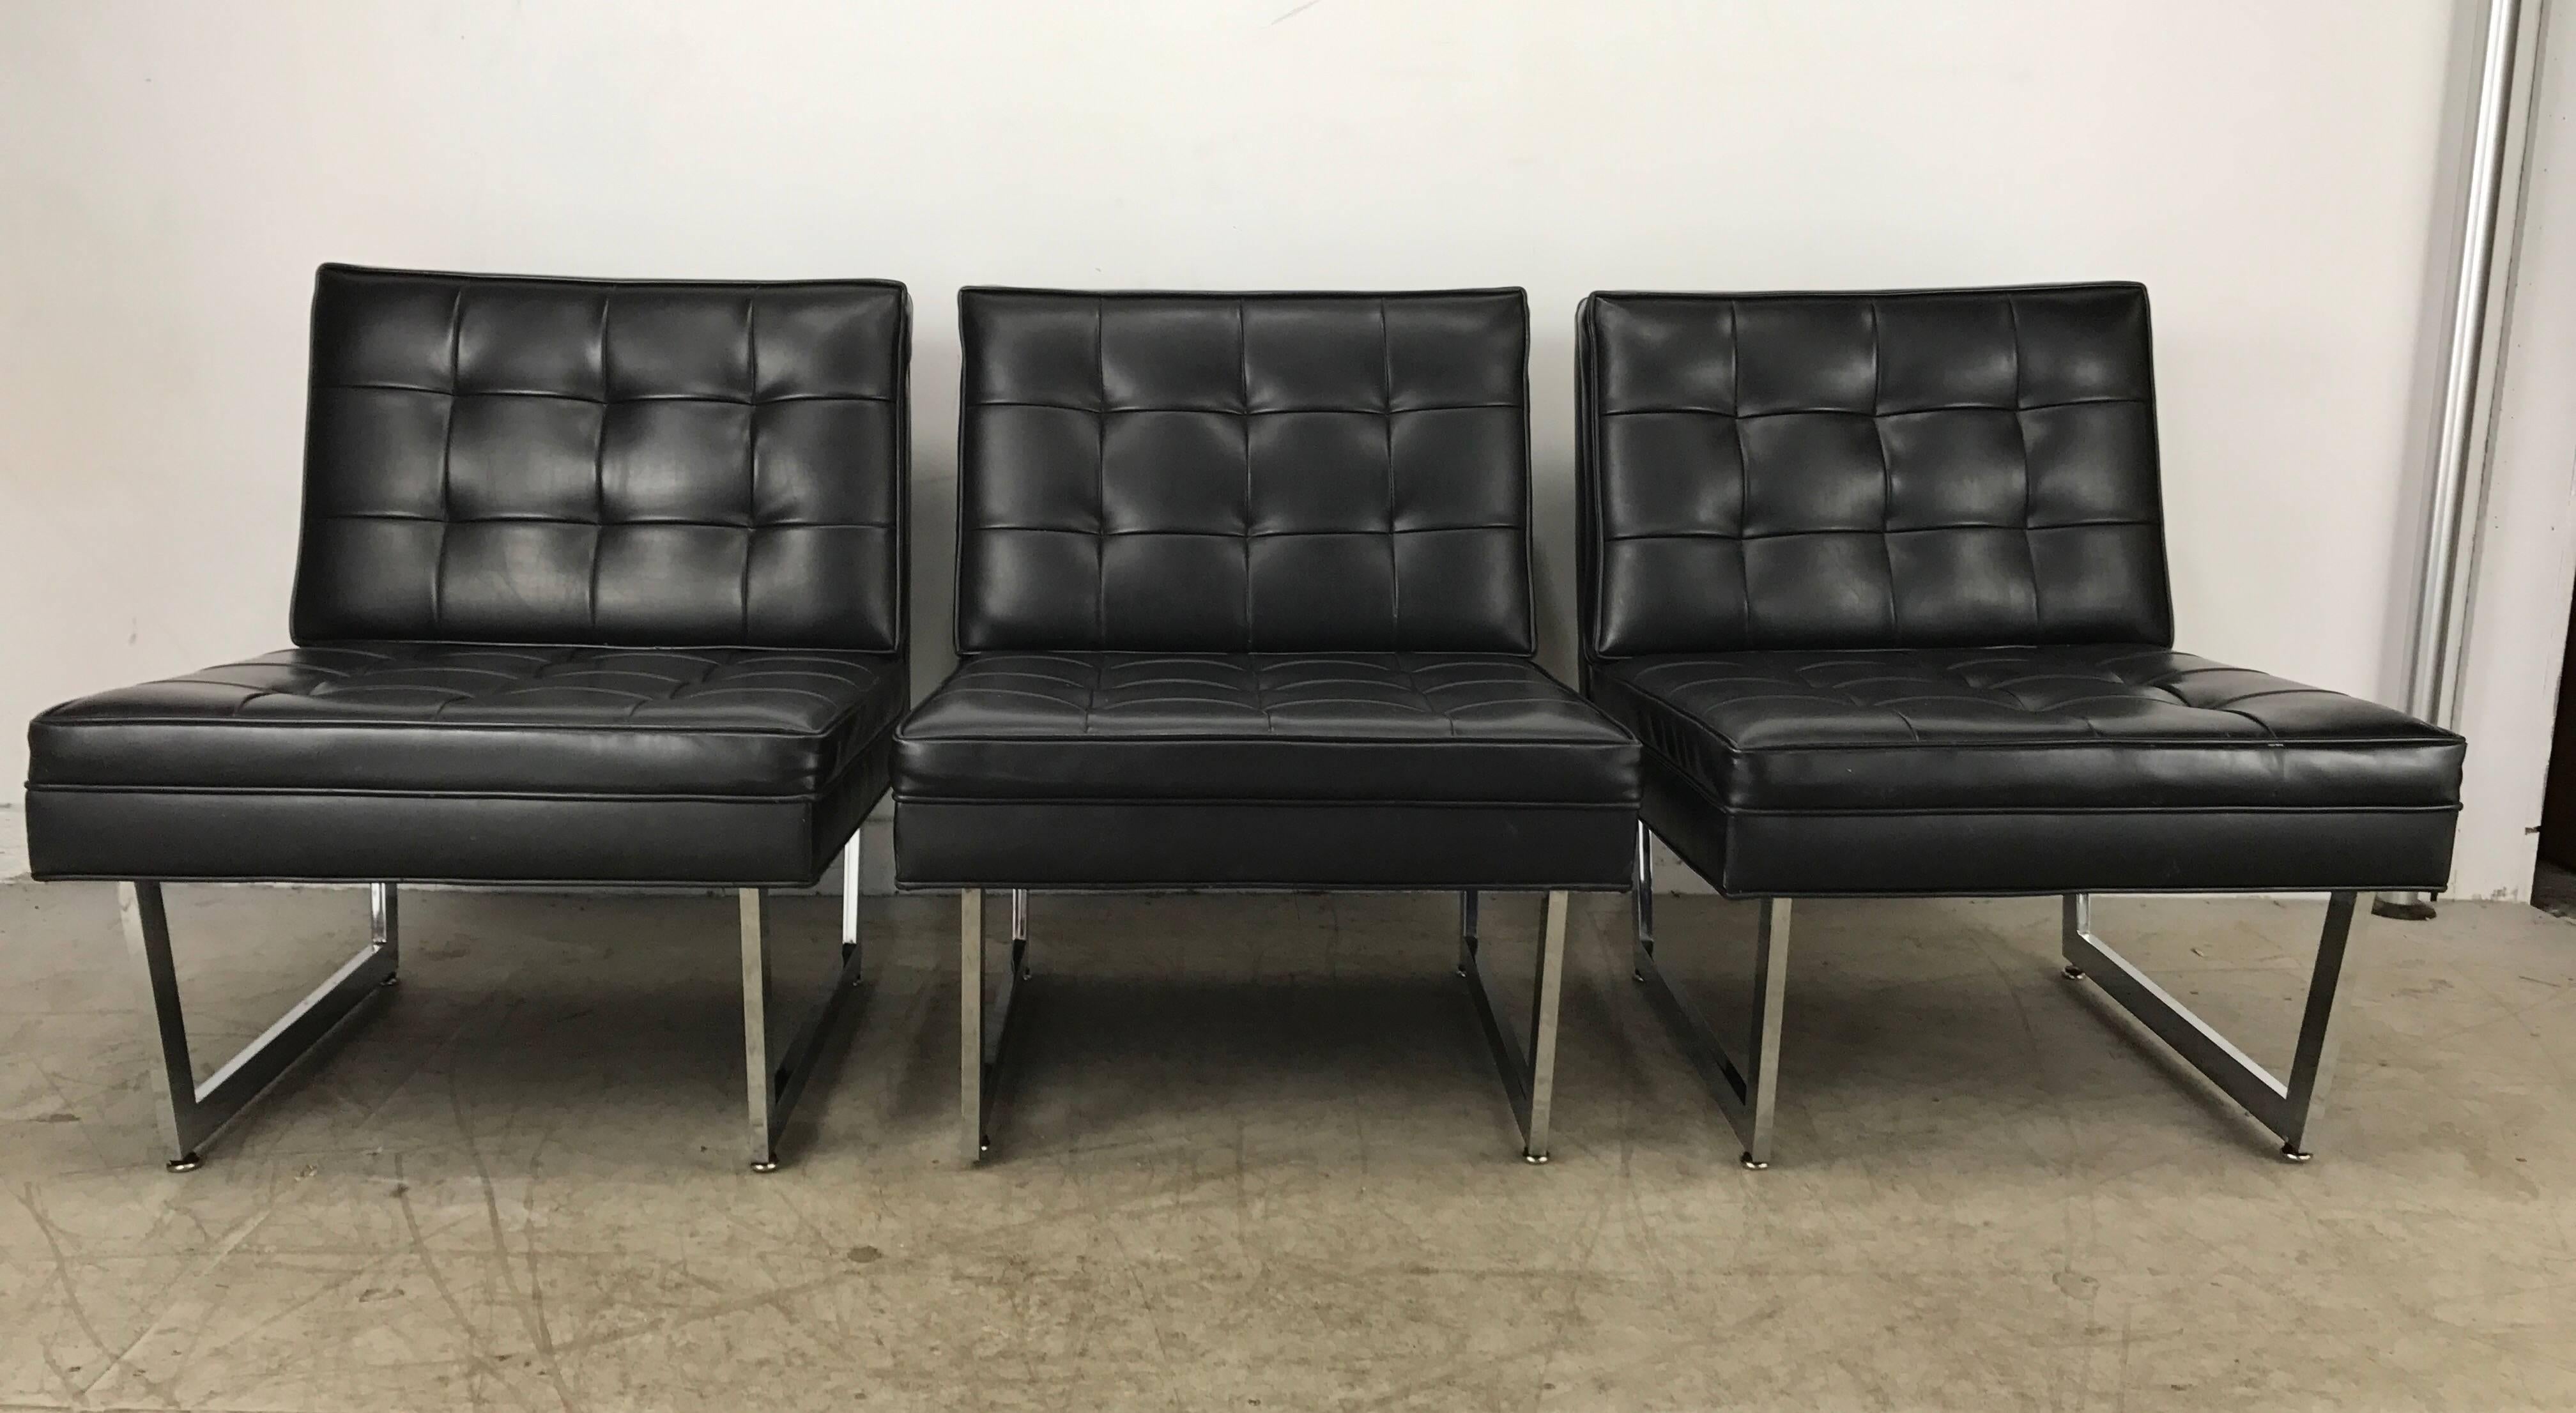 Classic Modernist three-piece modular set, manufactured by Patrician Furniture Company, stunning lines reminiscent of the iconic Tugenhat chair designed by Mies Van der Rohe and Lilly Reich, retains original black Naugahyde seat and back, polished